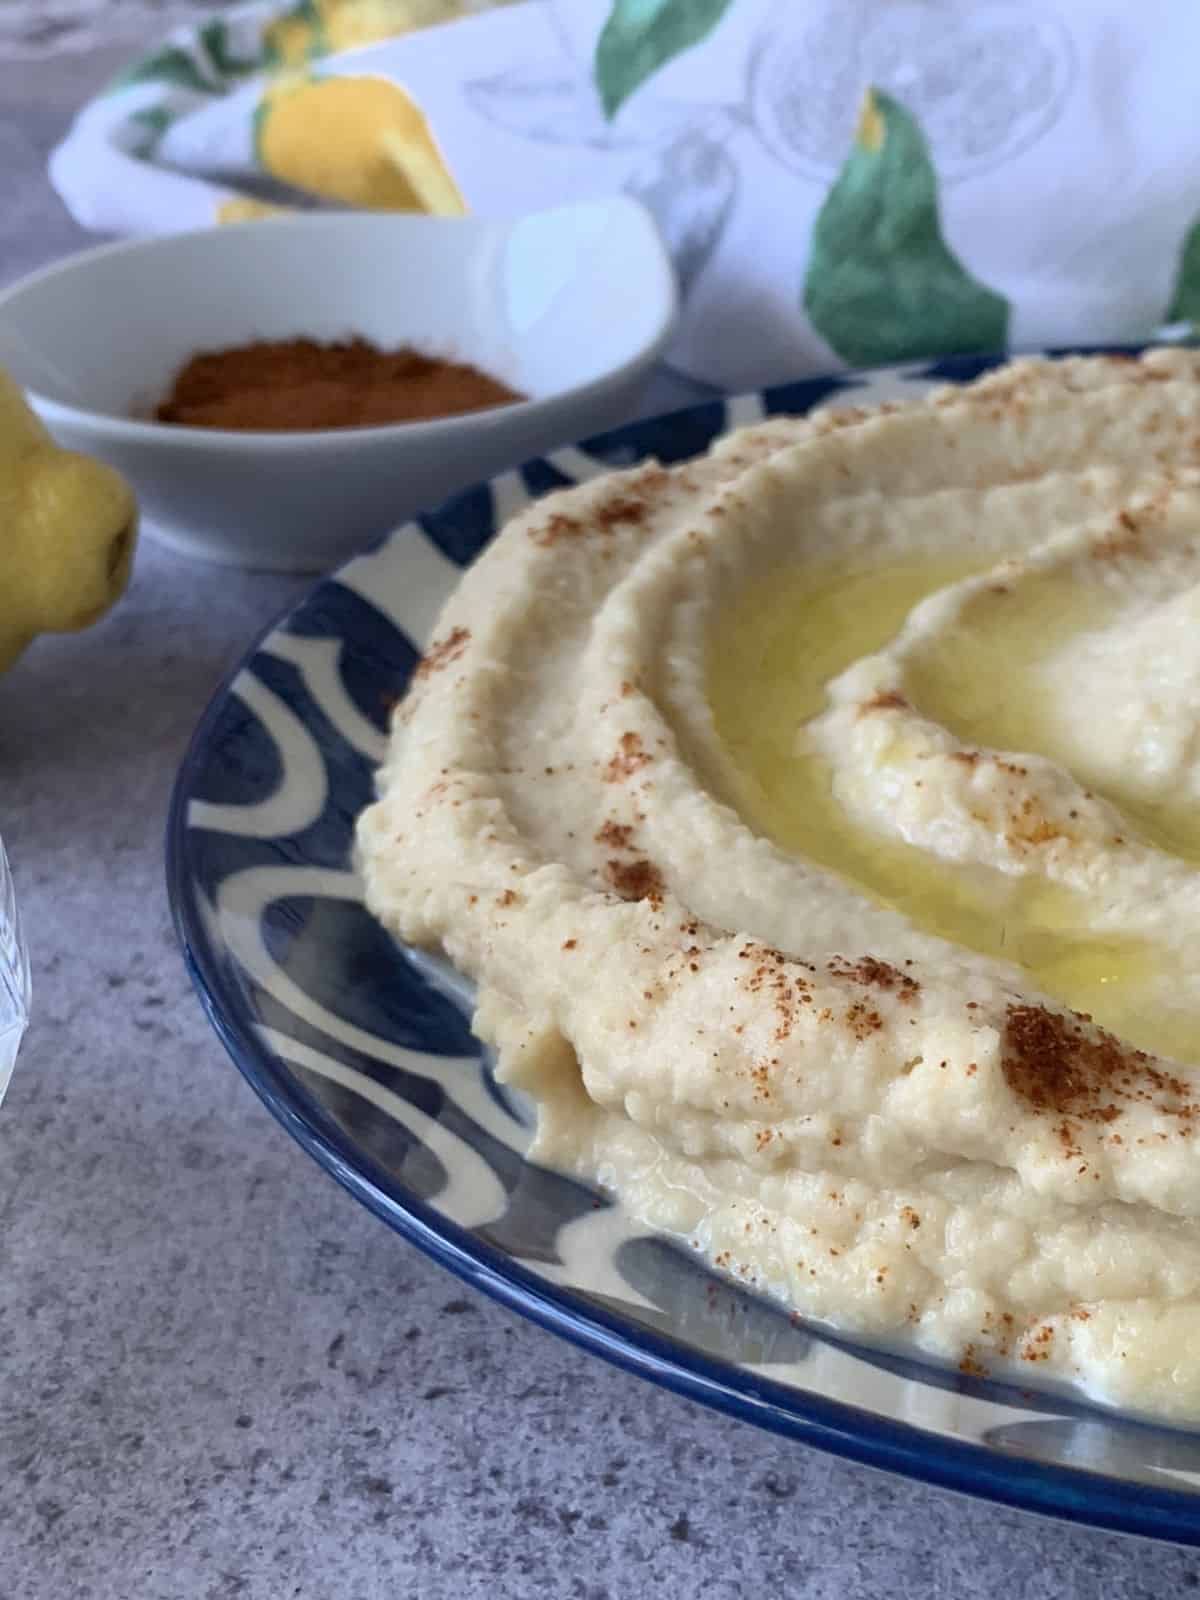 Creamy hummus from the side.